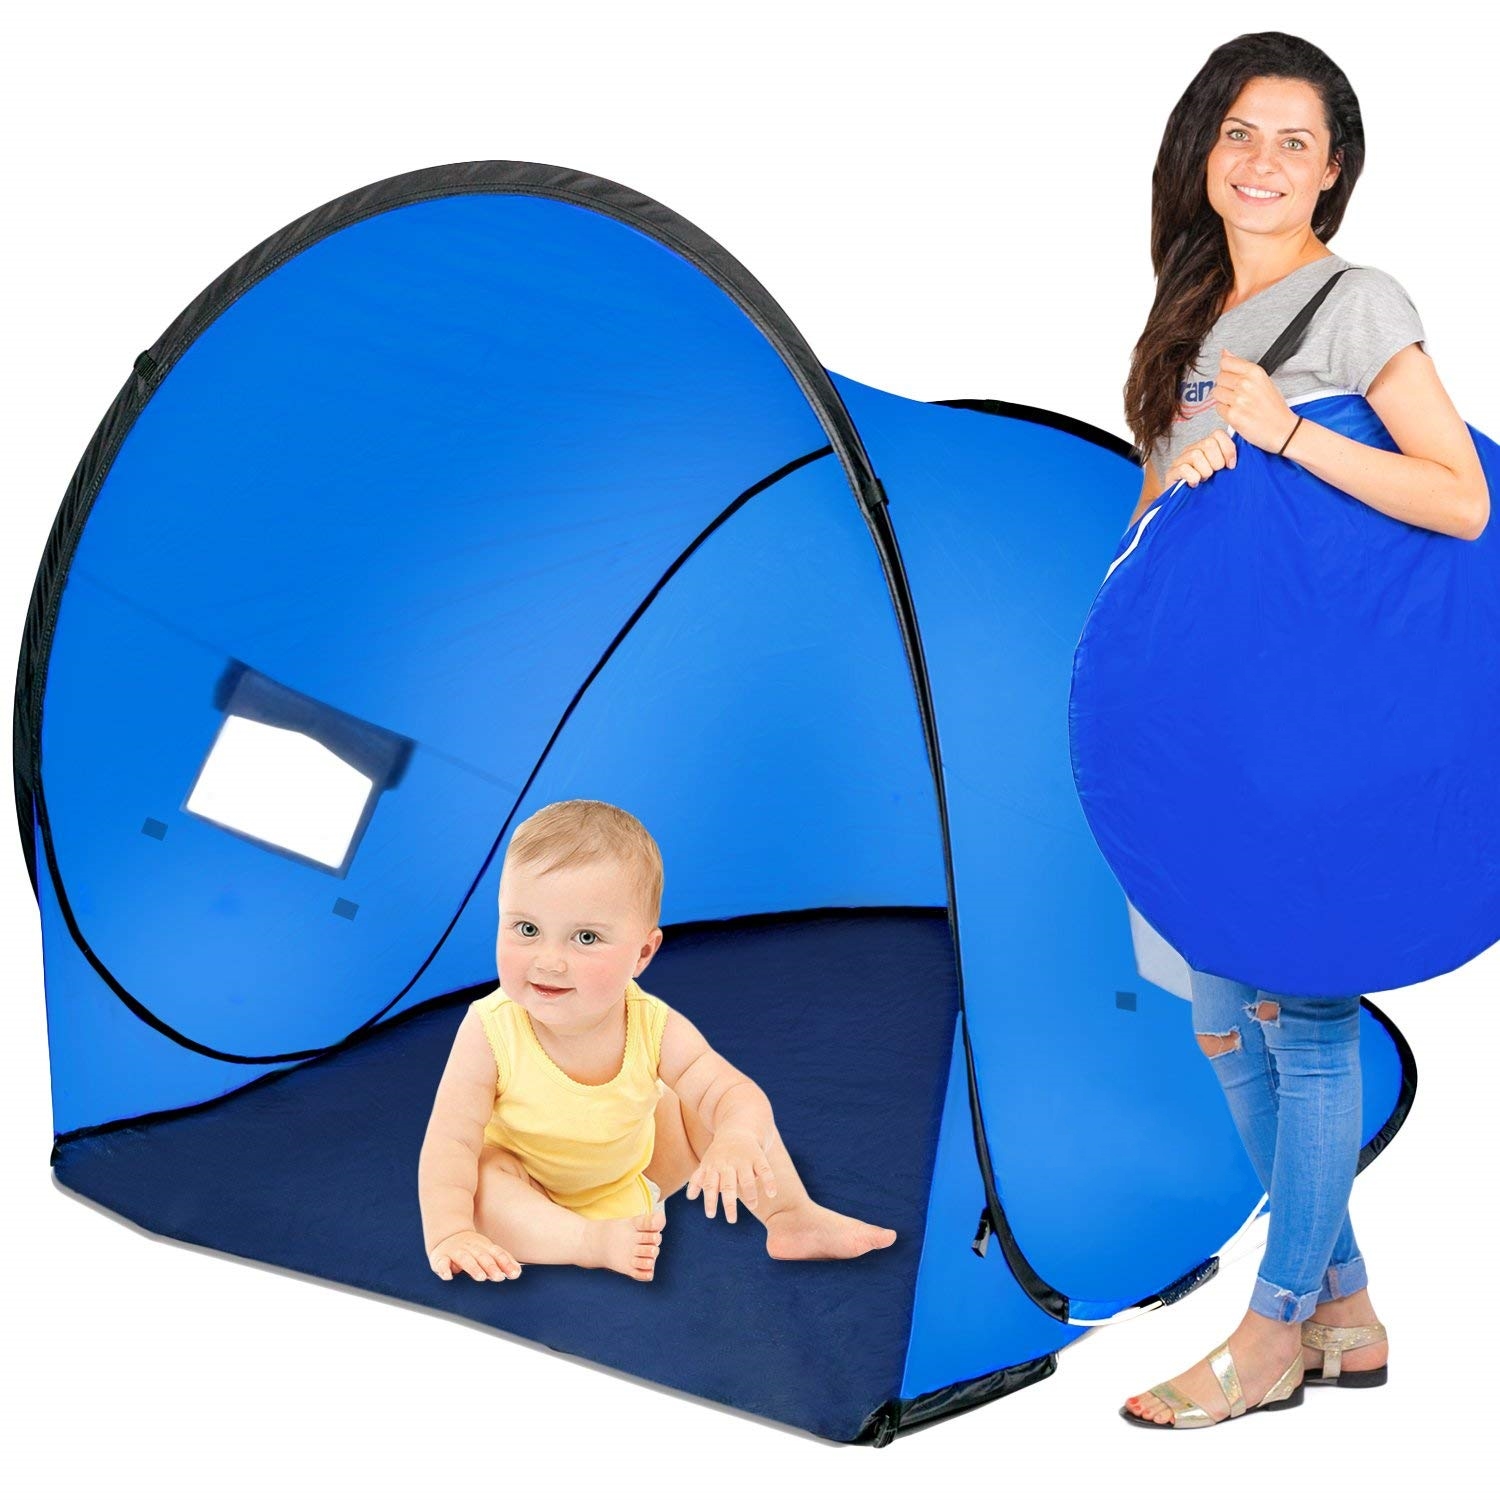 AIOIAI Baby Beach Tent UV - Infant Shelter Camping Cabana Pop up Shade Gear Sun Babies Shelter. Campela - Portable Great Toddler Shelters for Beach 